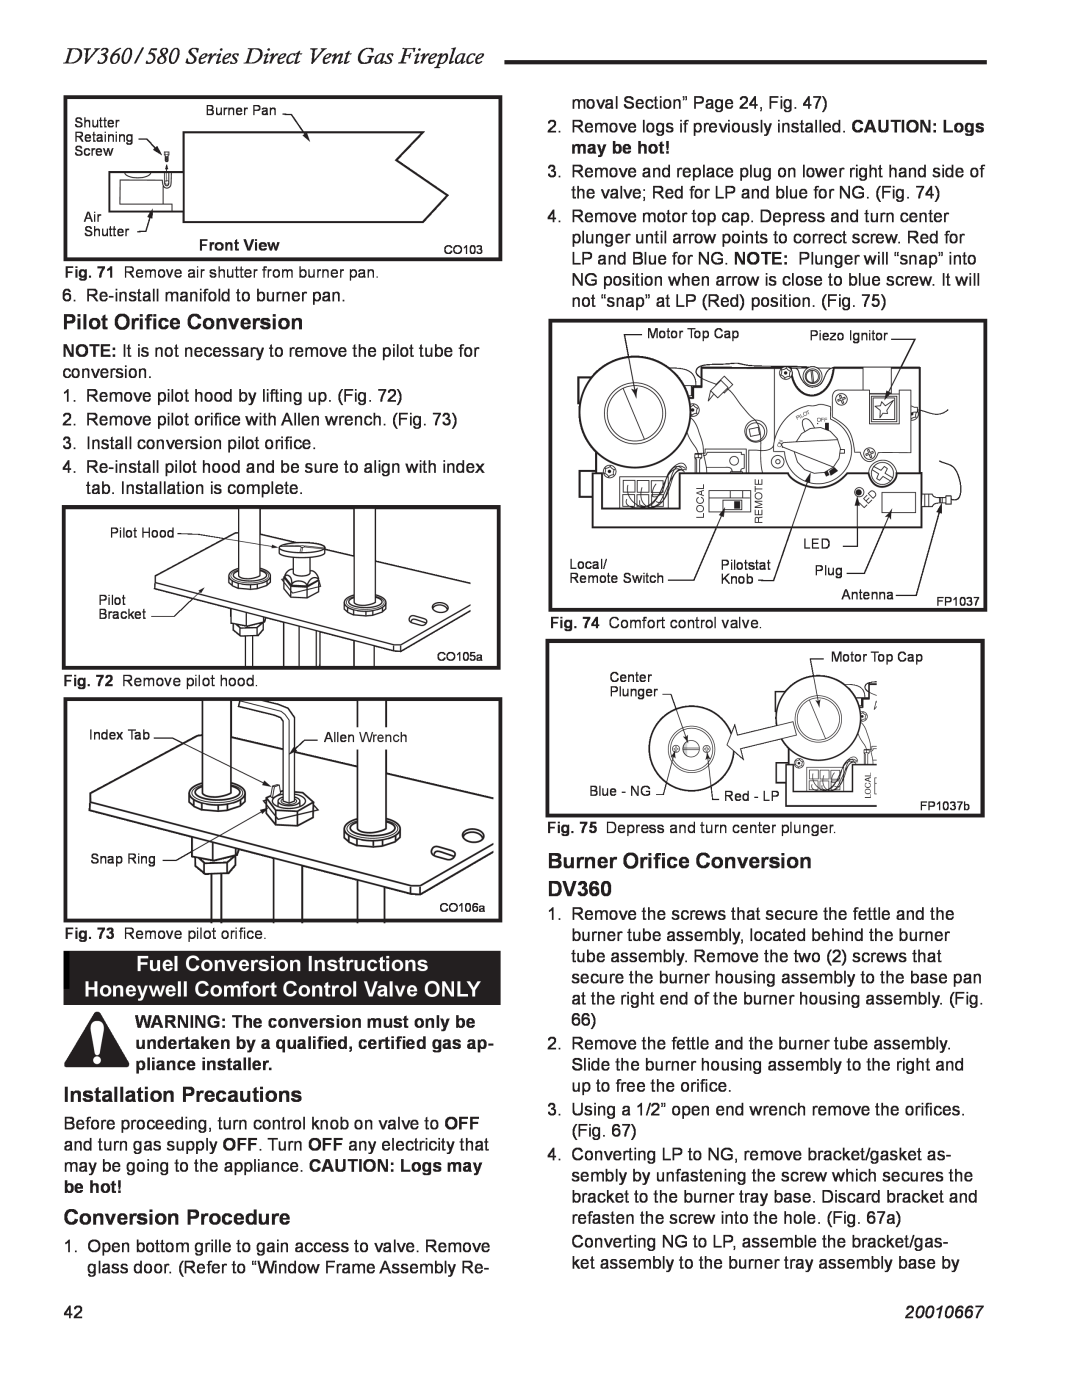 Vermont Casting DV360 manual Fuel Conversion Instructions Honeywell Comfort Control Valve ONLY, 20010667, Front View 